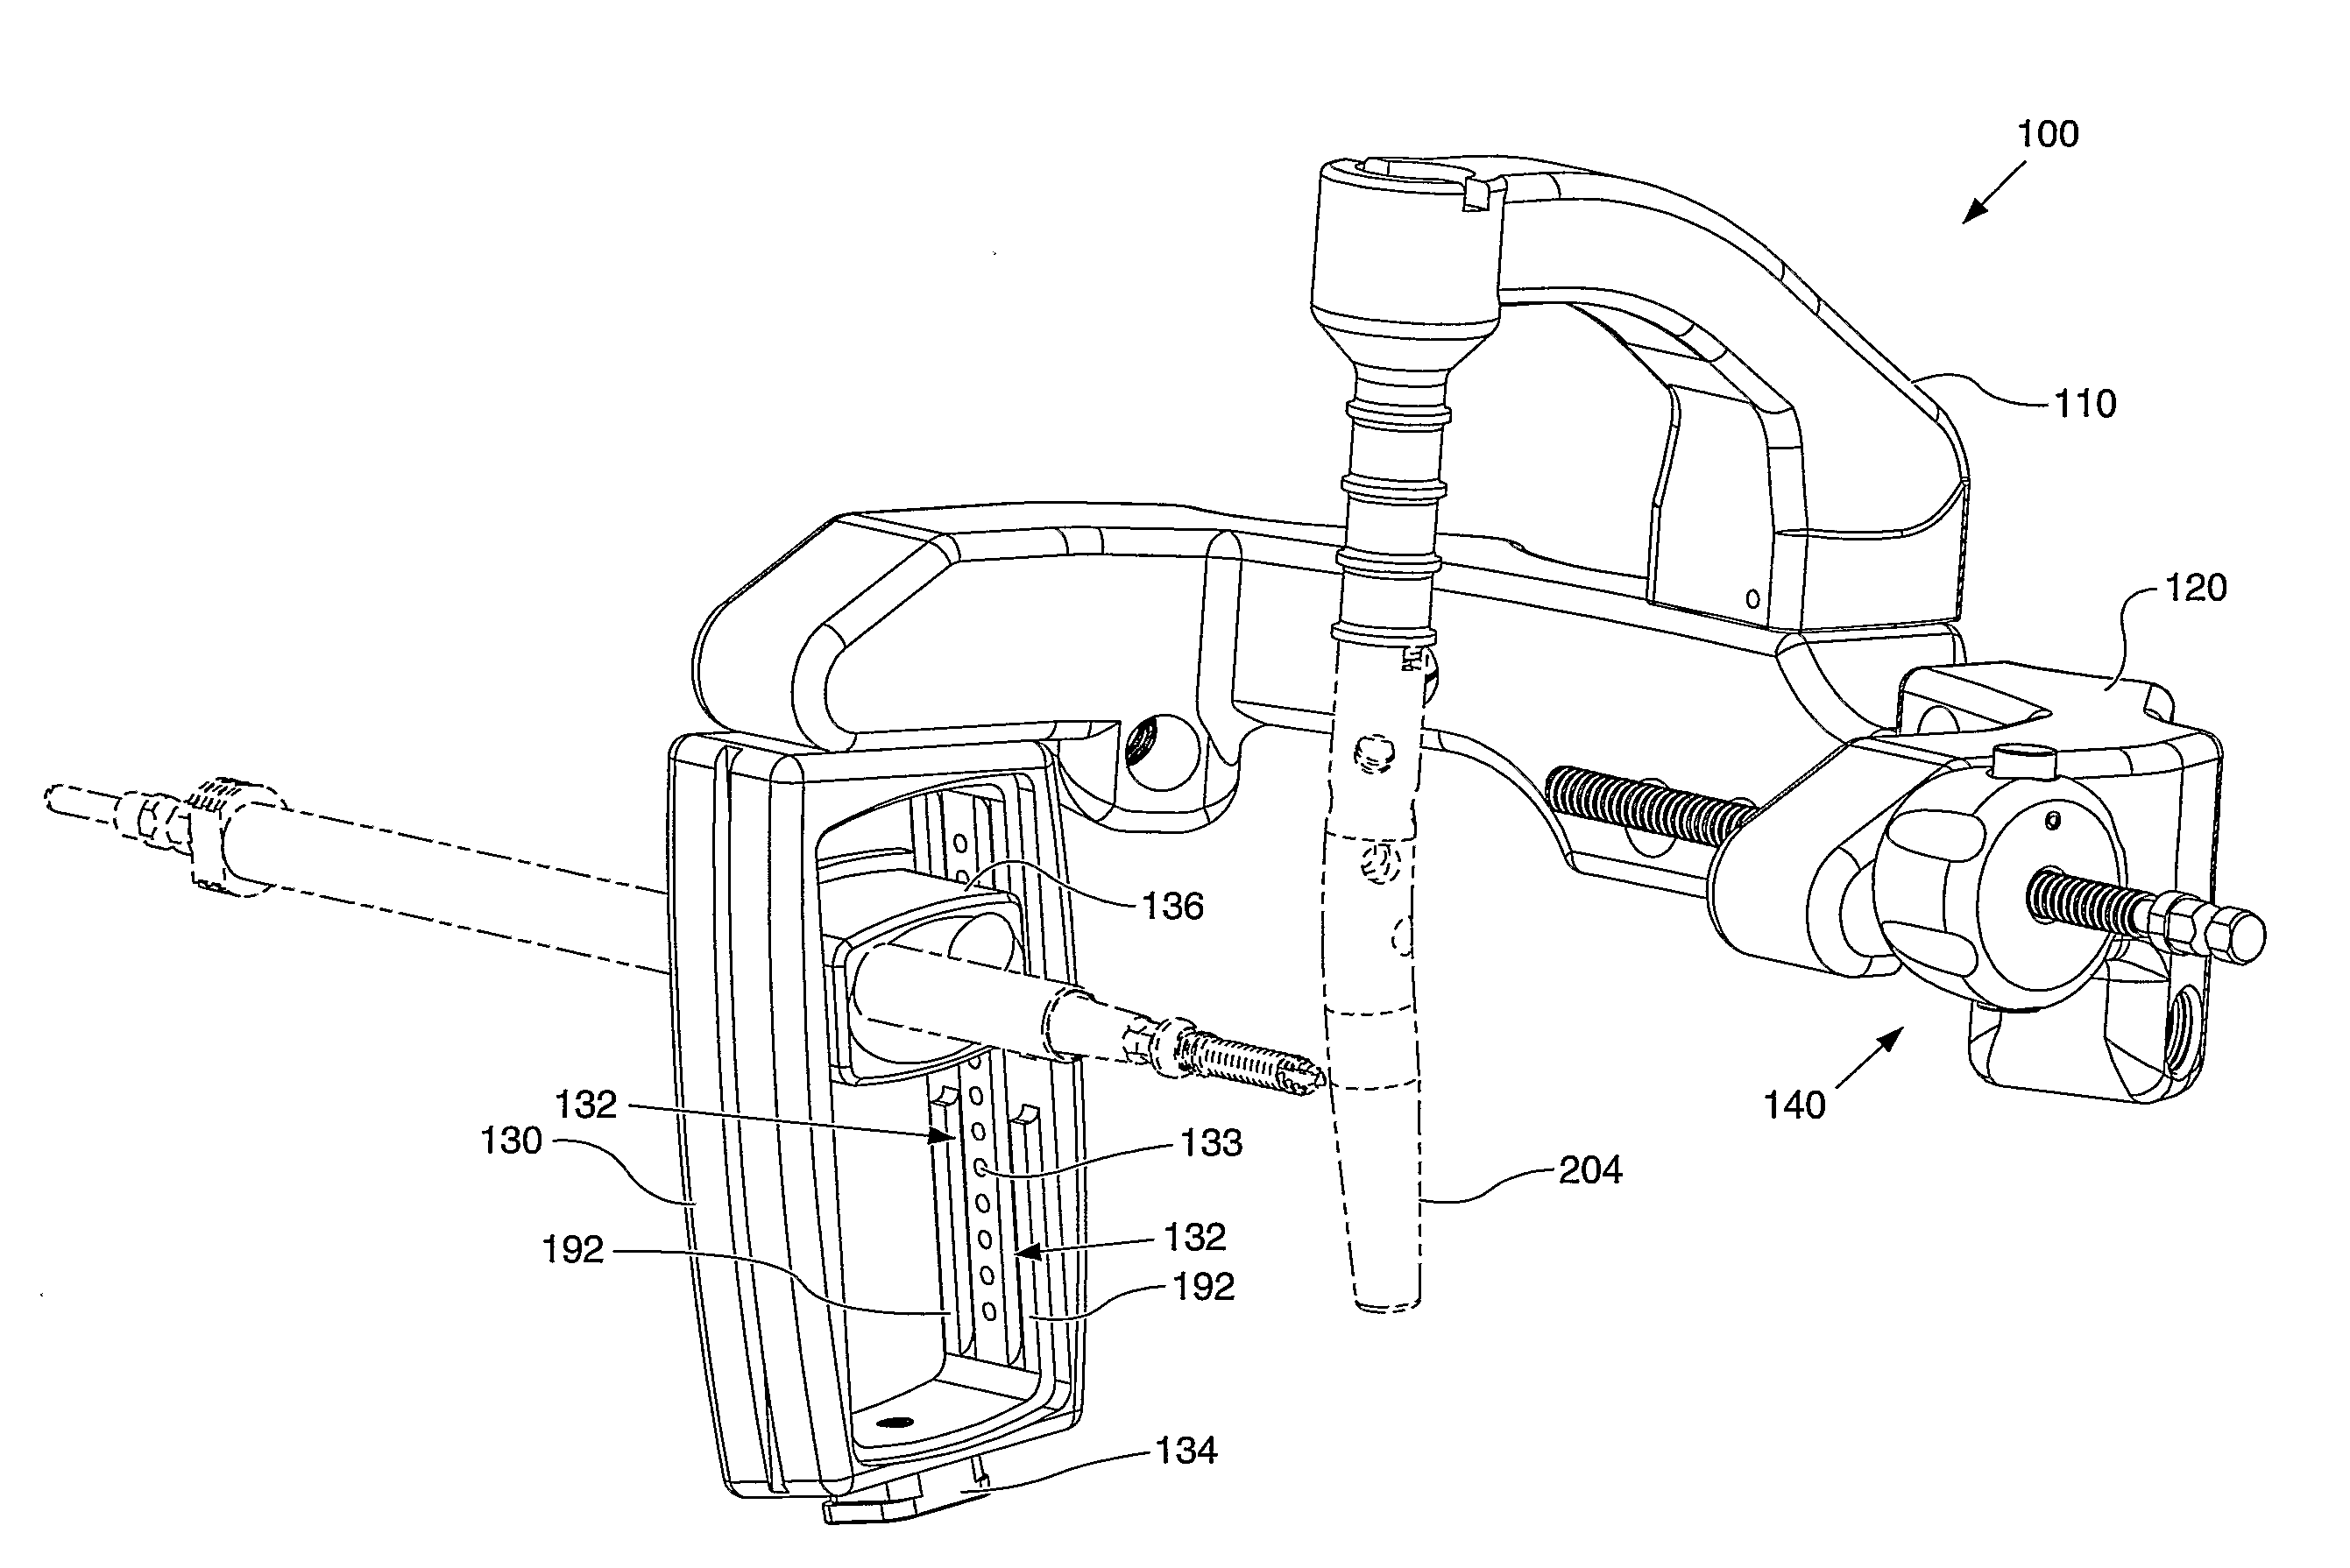 Instrument for Fracture Fragment Alignment and Stabilization